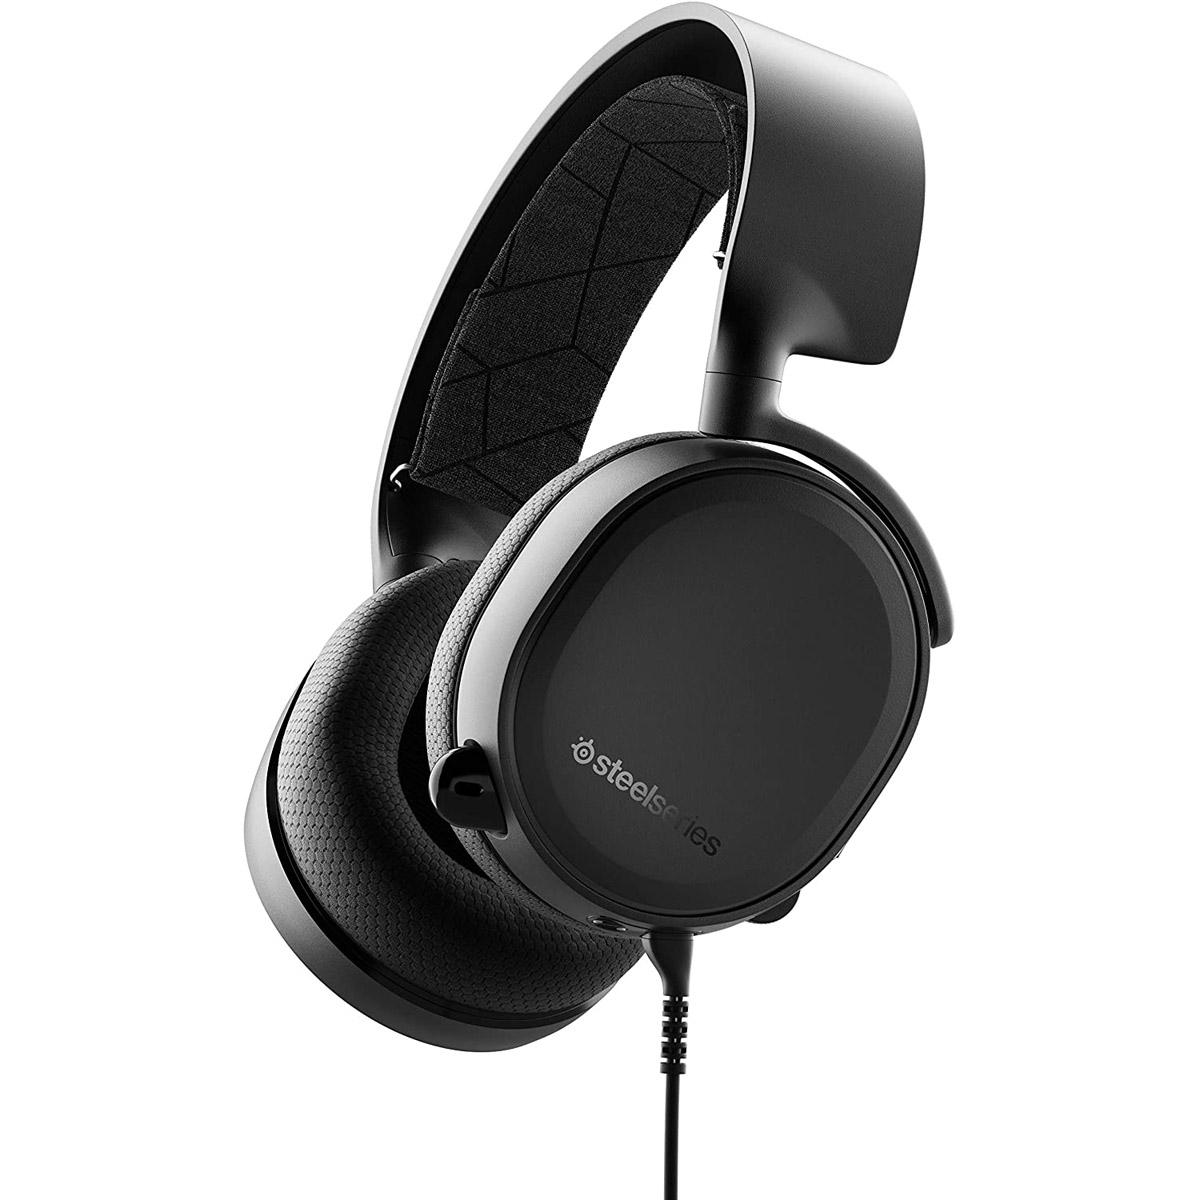 SteelSeries Arctis 3 All-Platform Gaming Headset for $34.99 Shipped